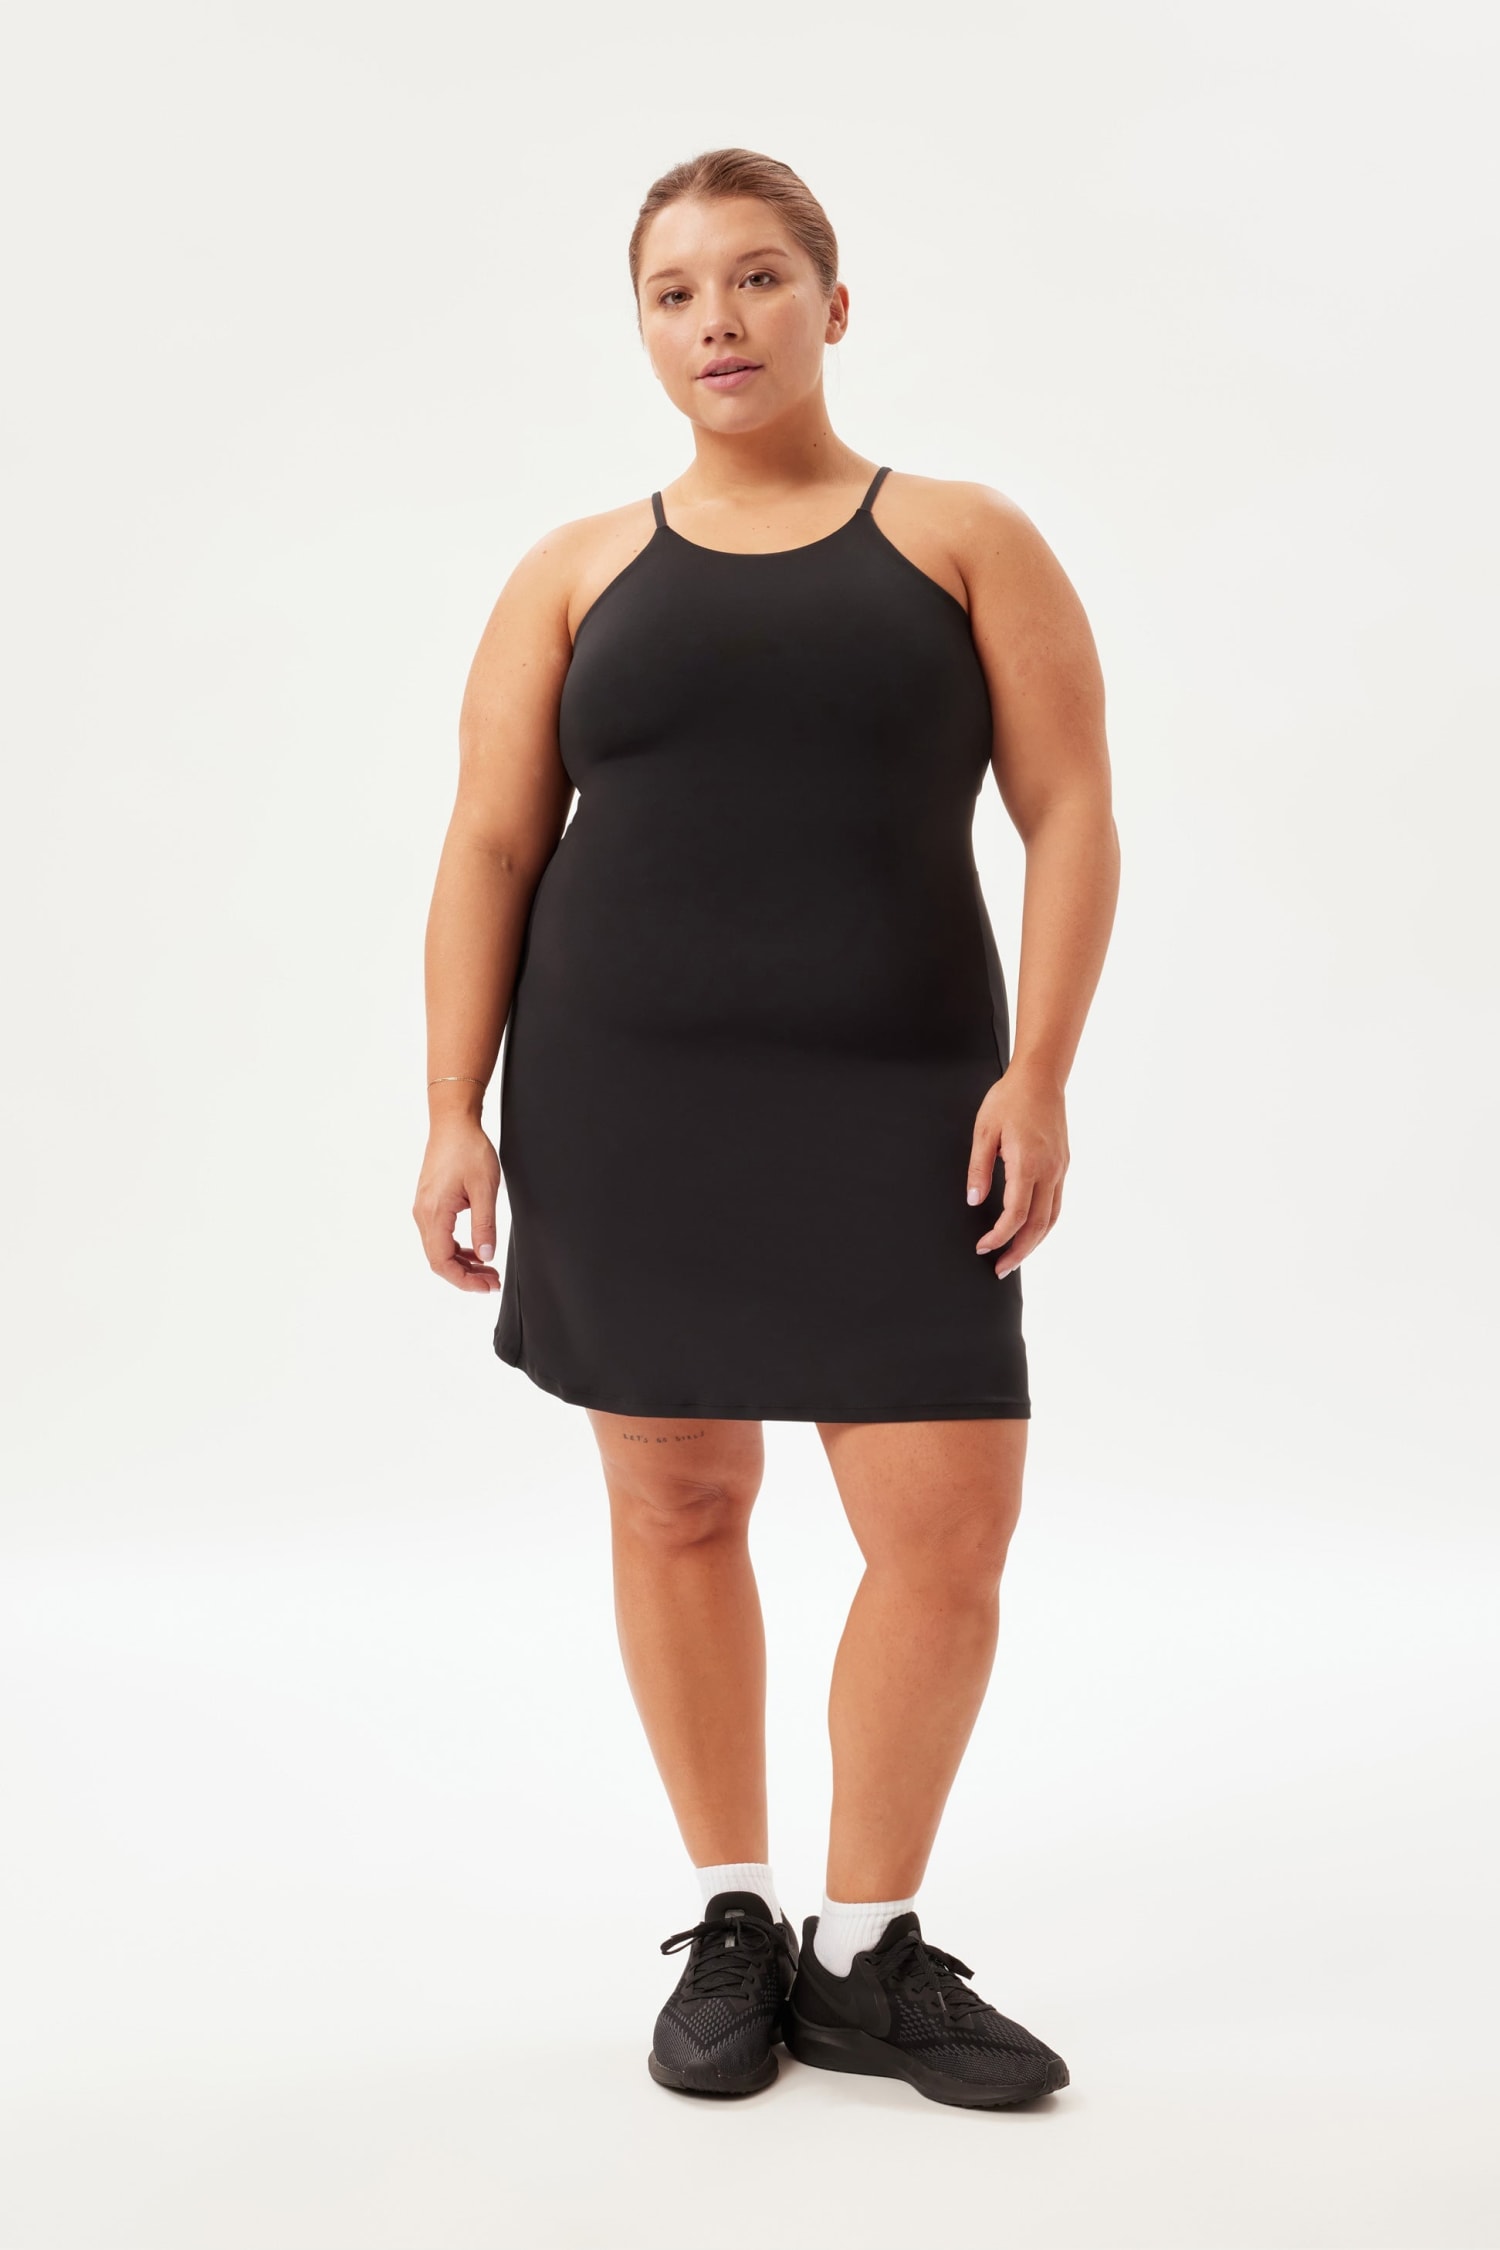 HDE Womens Plus Size Tennis Athletic Workout Dress with Built-in Shorts &  Bra Black